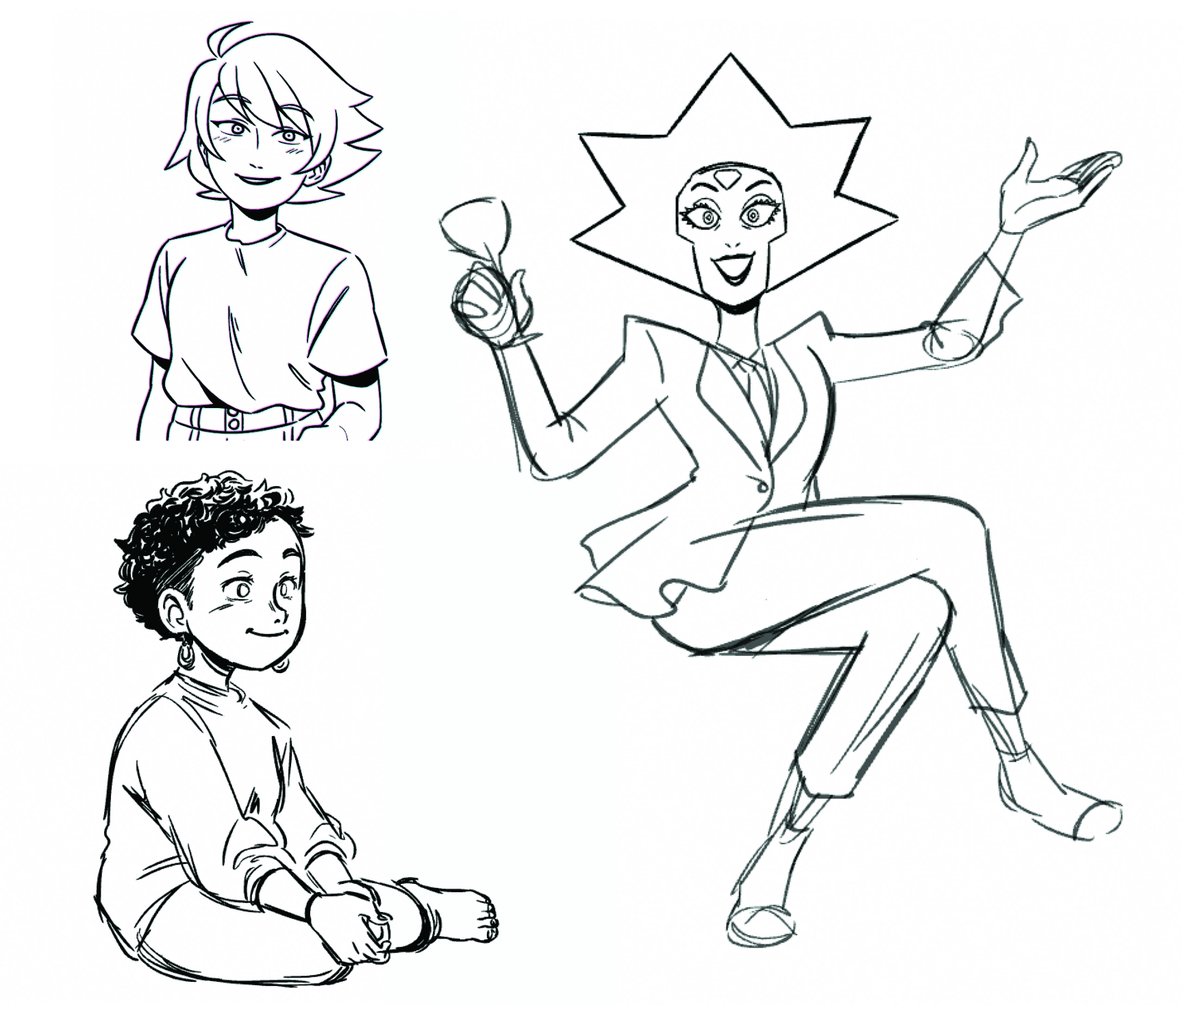 went through old sbp files and found some sketches i'll likely never finish 